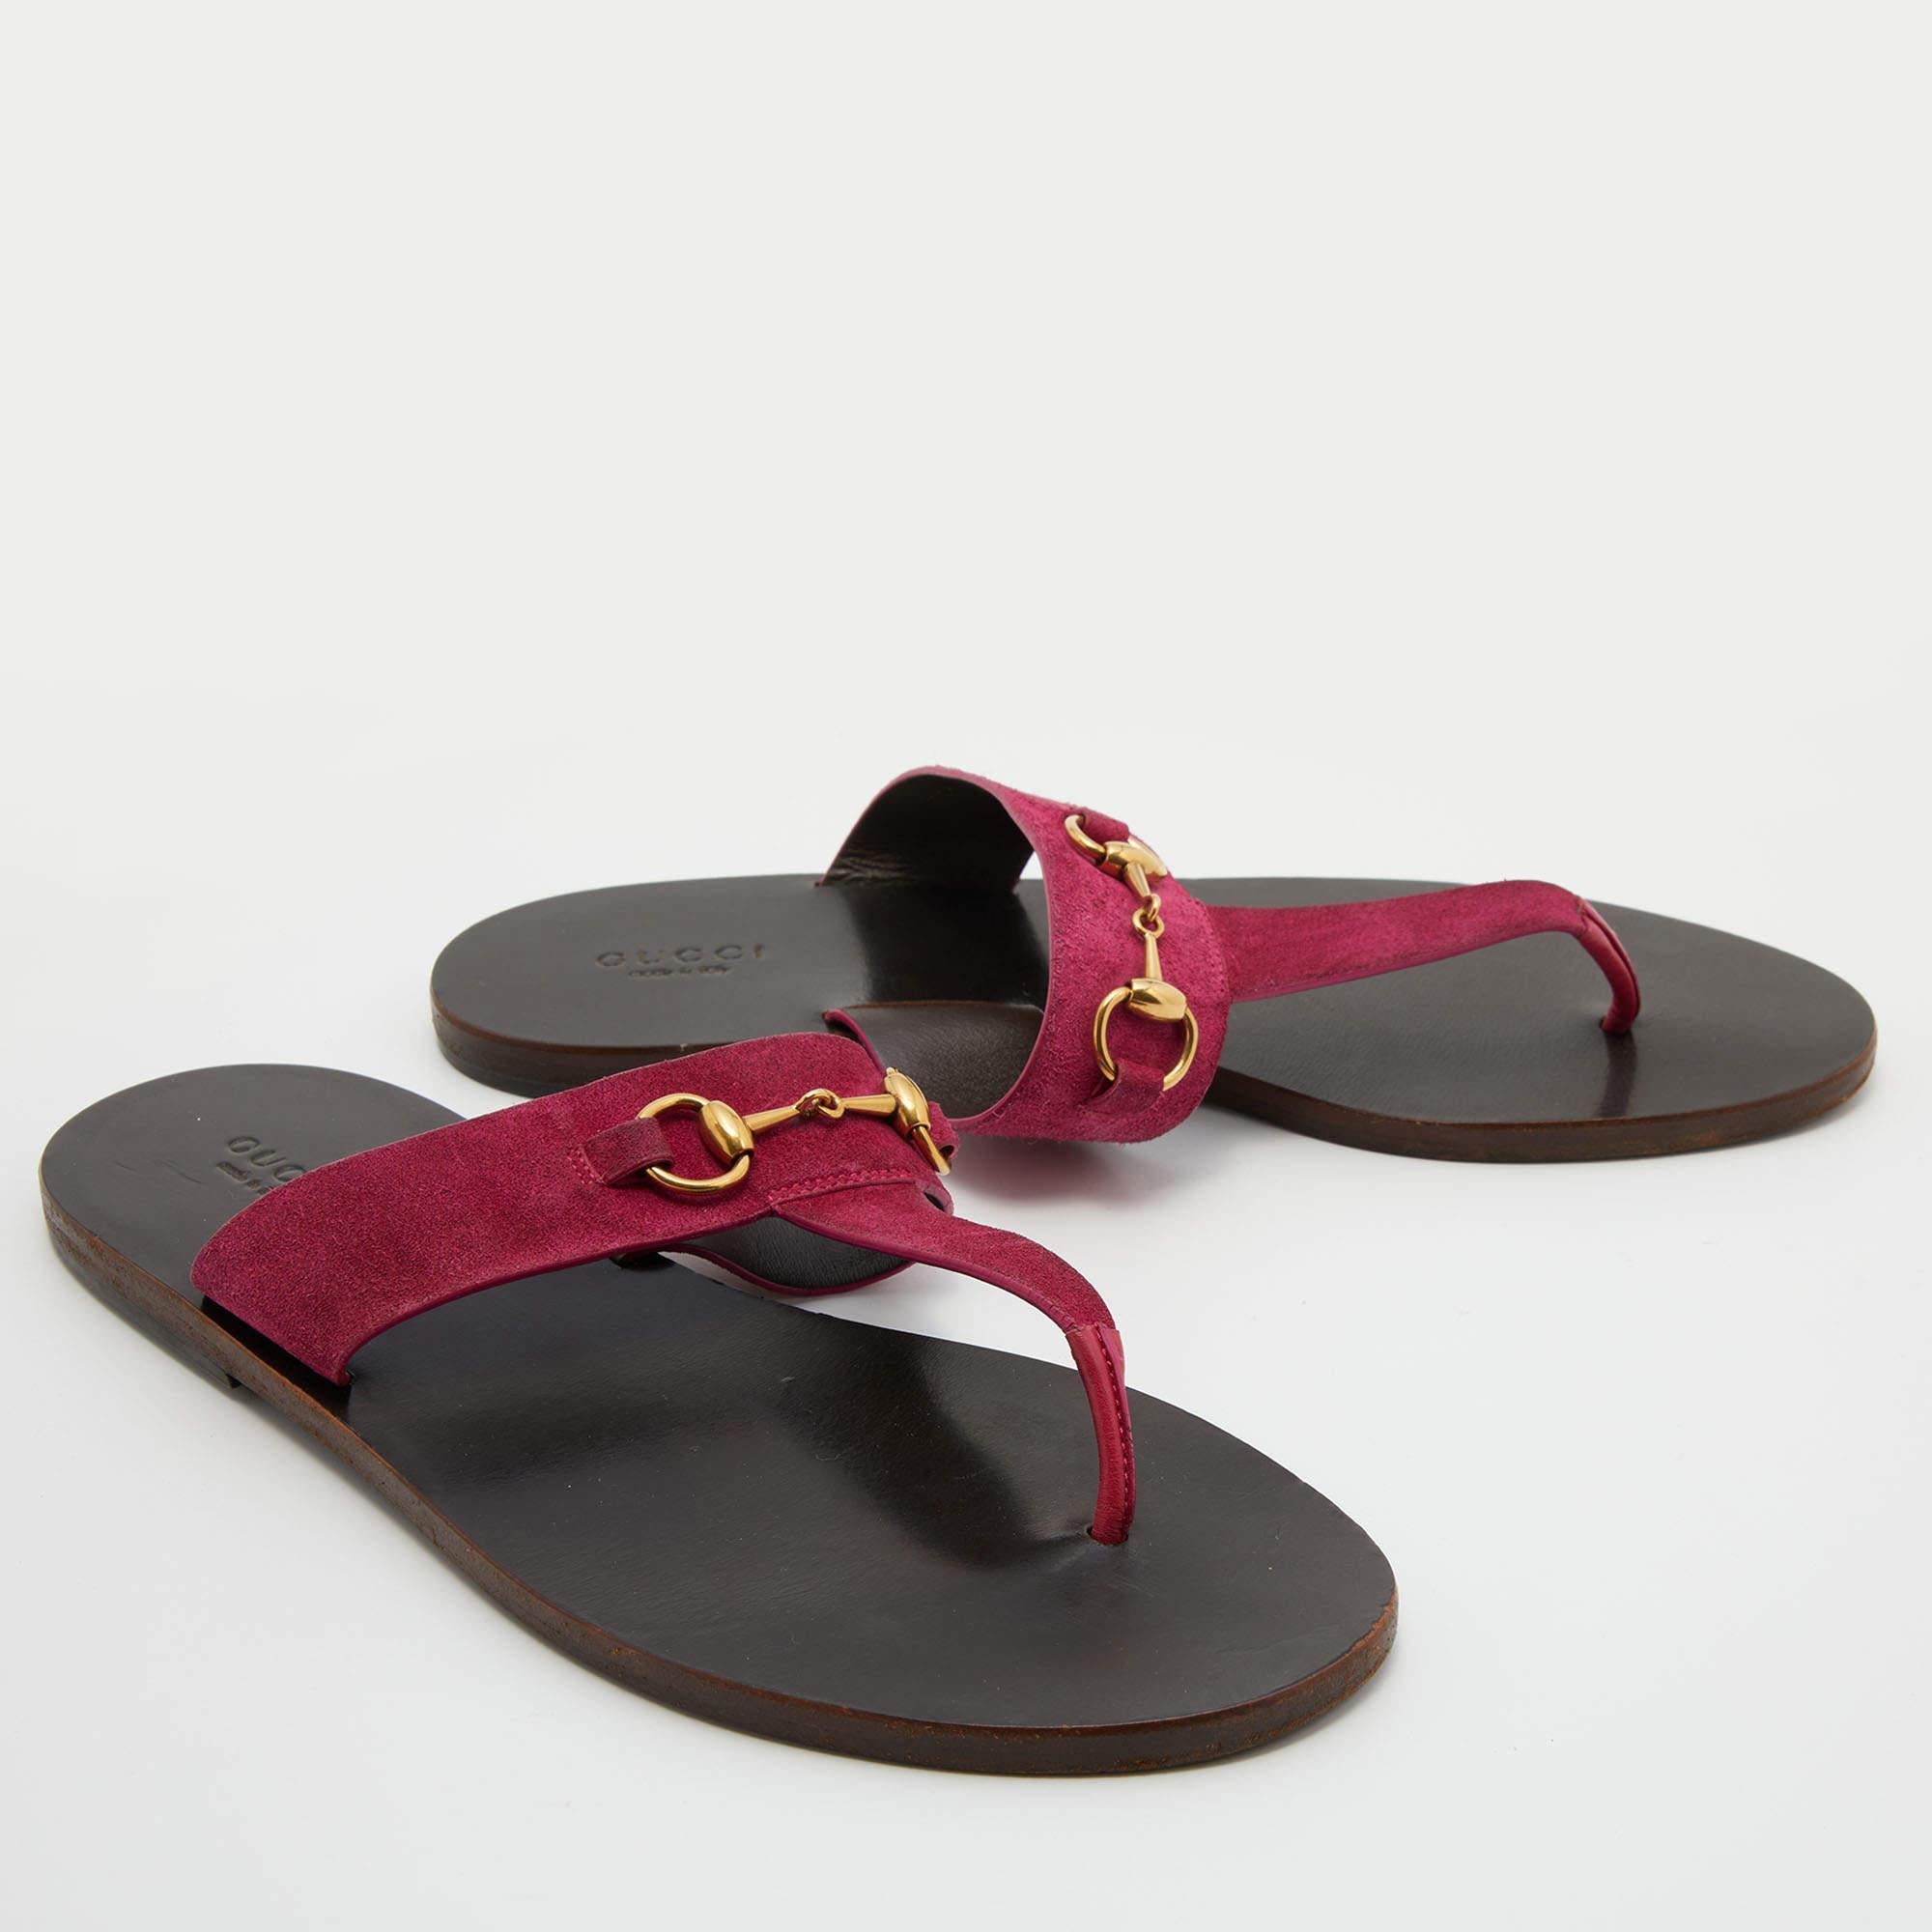 These flat sandals from Gucci are made from suede and detailed with the Horsebit motif. The open design ensures that they are easy to slip into. Designed in pink, these thong sandals are a great way to highlight any casual ensemble.

